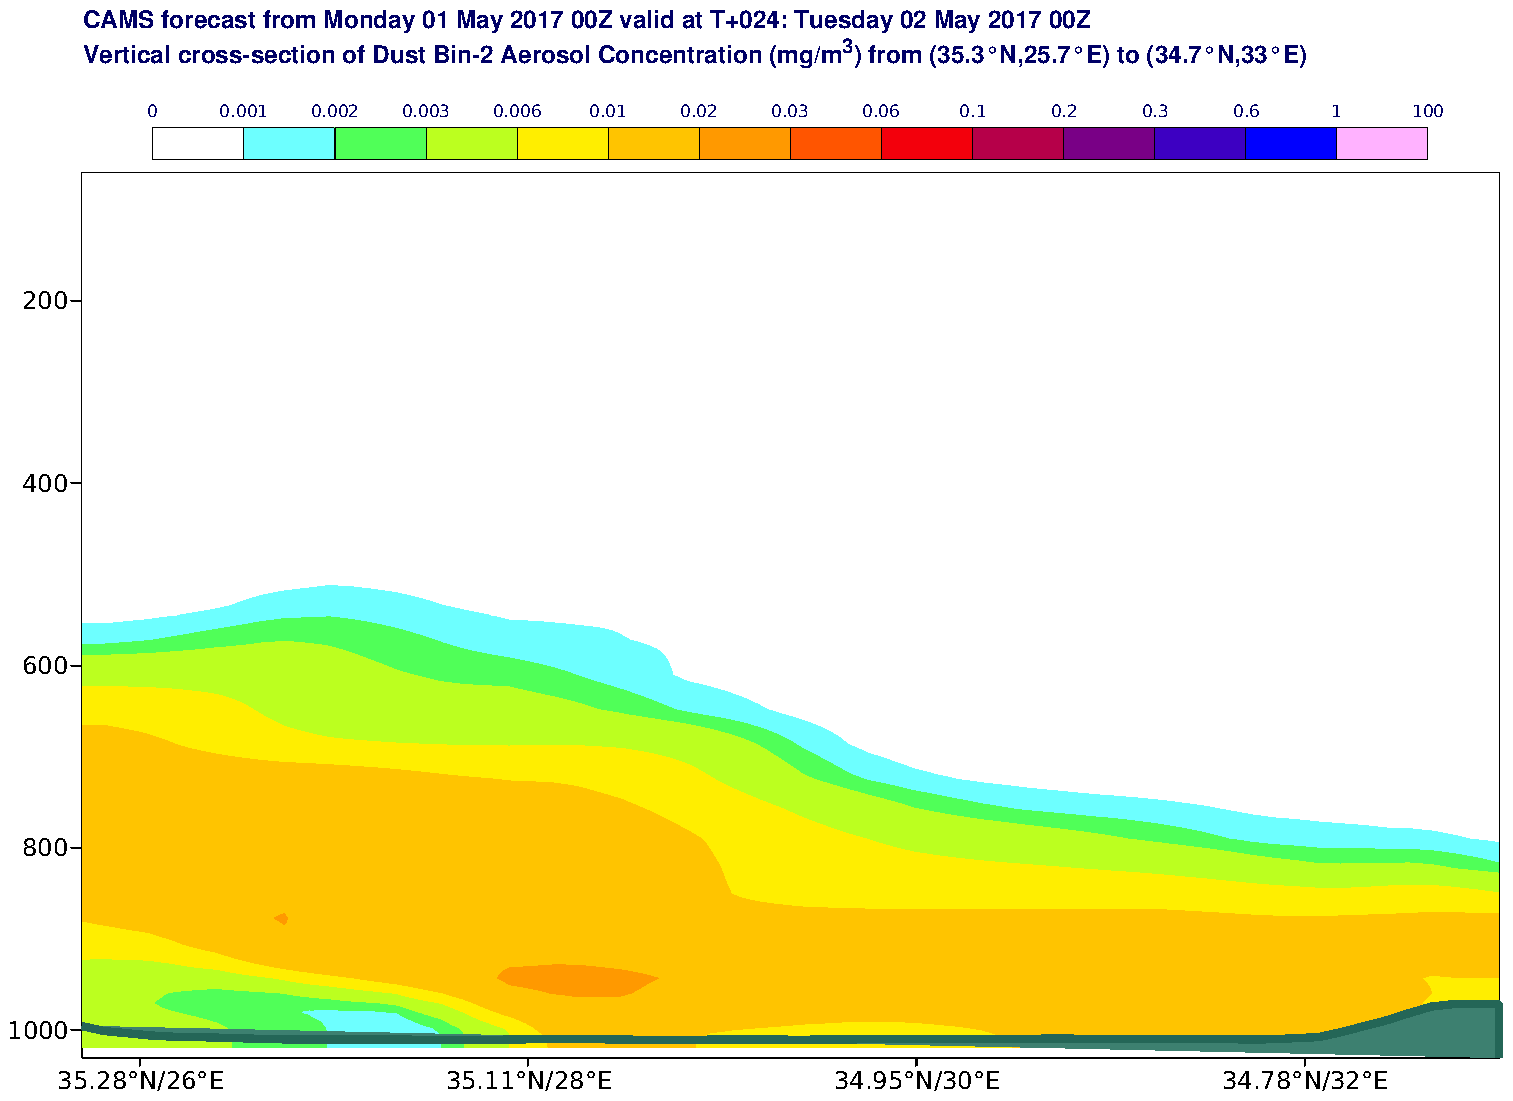 Vertical cross-section of Dust Bin-2 Aerosol Concentration (mg/m3) valid at T24 - 2017-05-02 00:00